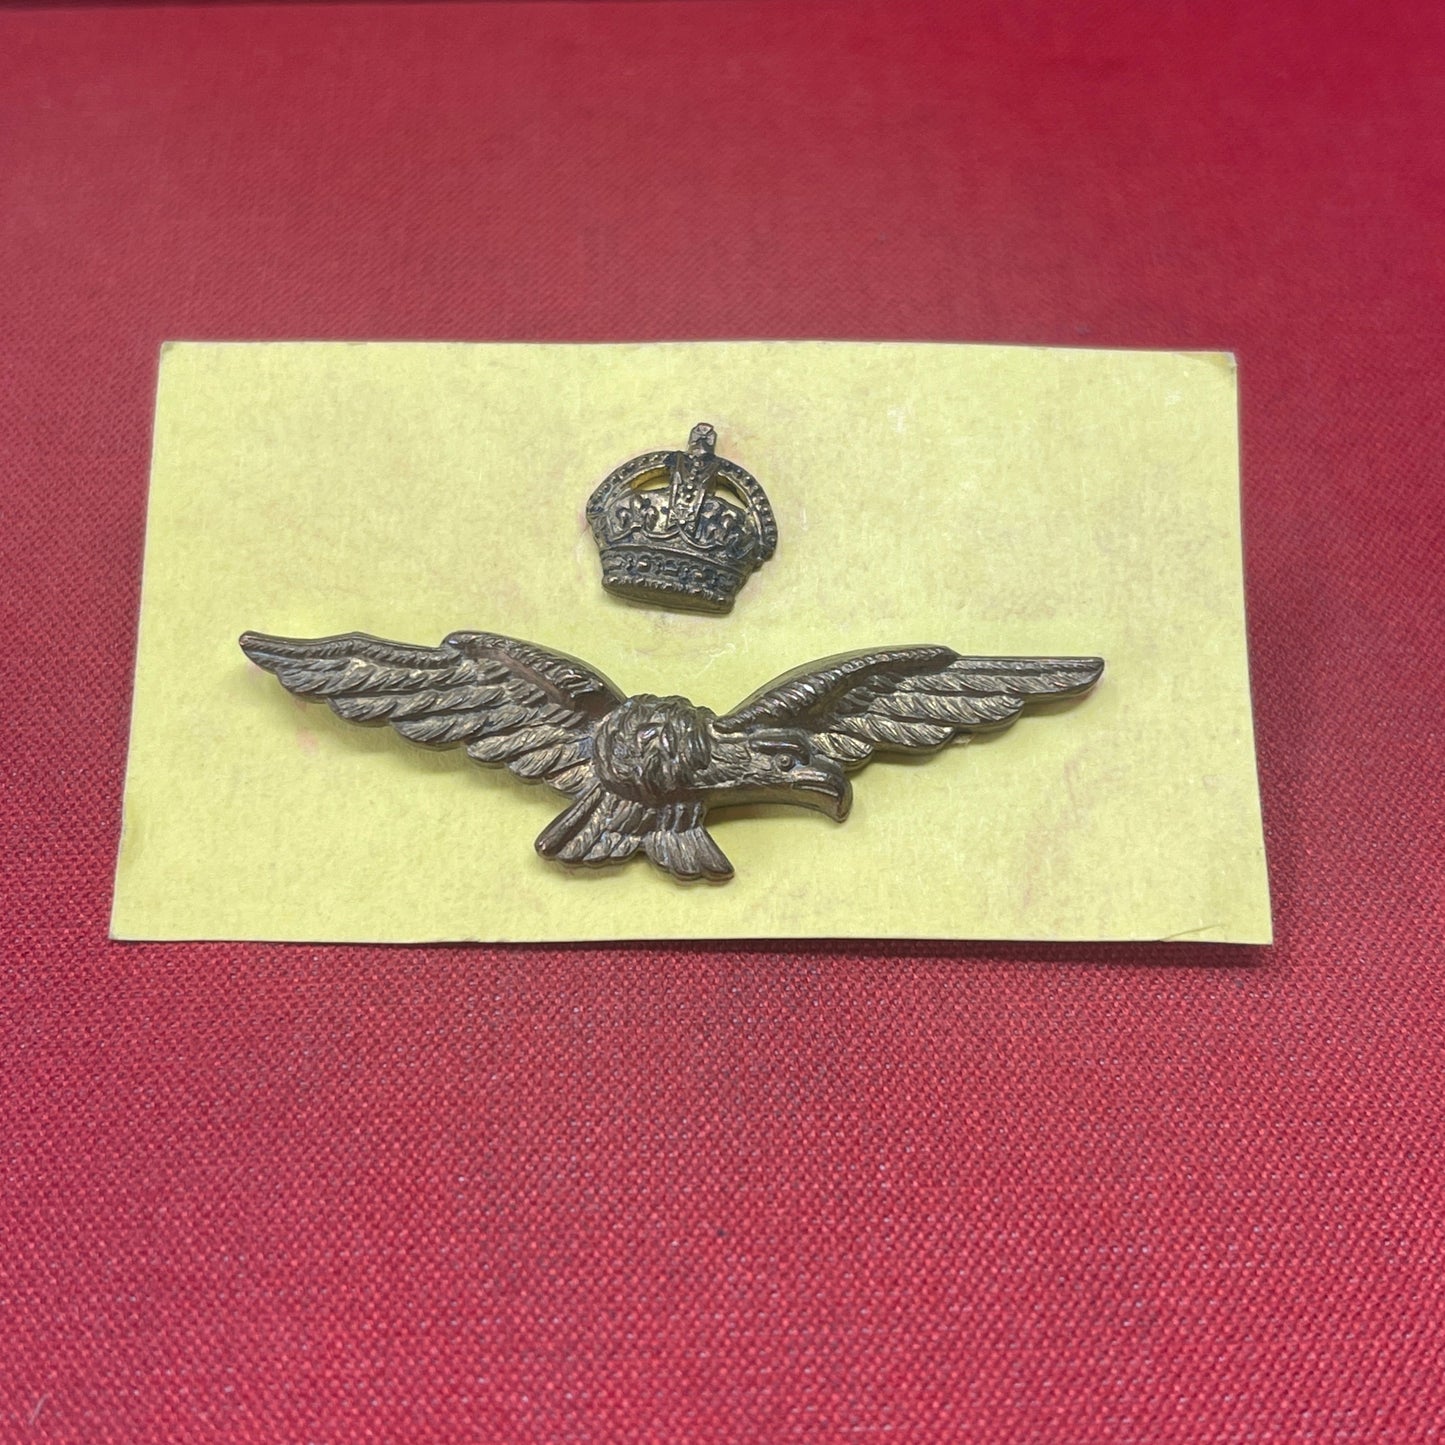 Royal Air Force Officer's Side-Hat Badge (2-Part) Brass Issue with King George VI Crown. Air Force Badge